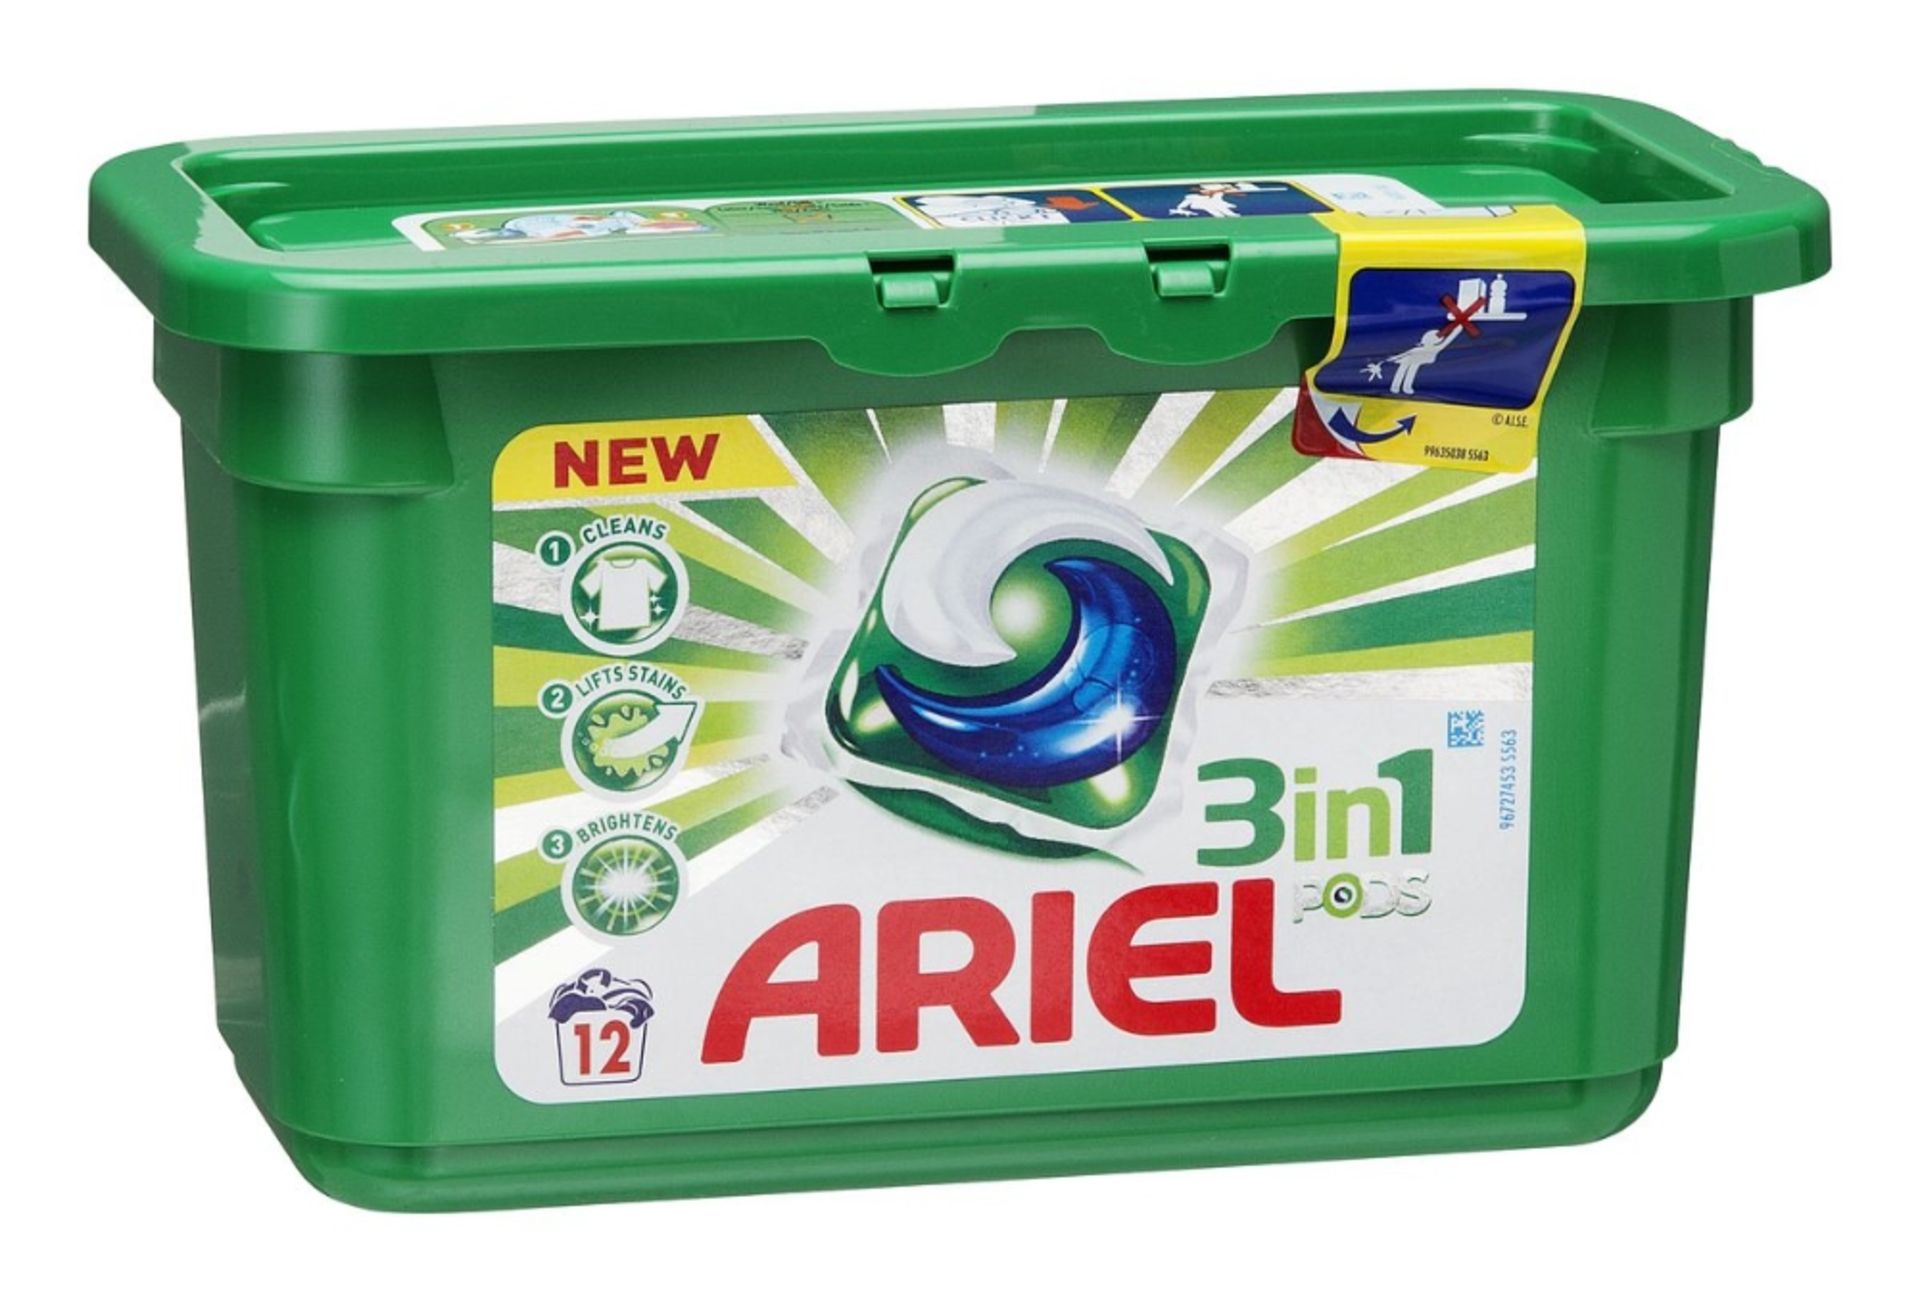 V Brand New Ariel 3 in 1 Pods 12 Wash Pack RRP8.99 X  6  Bid price to be multiplied by Six